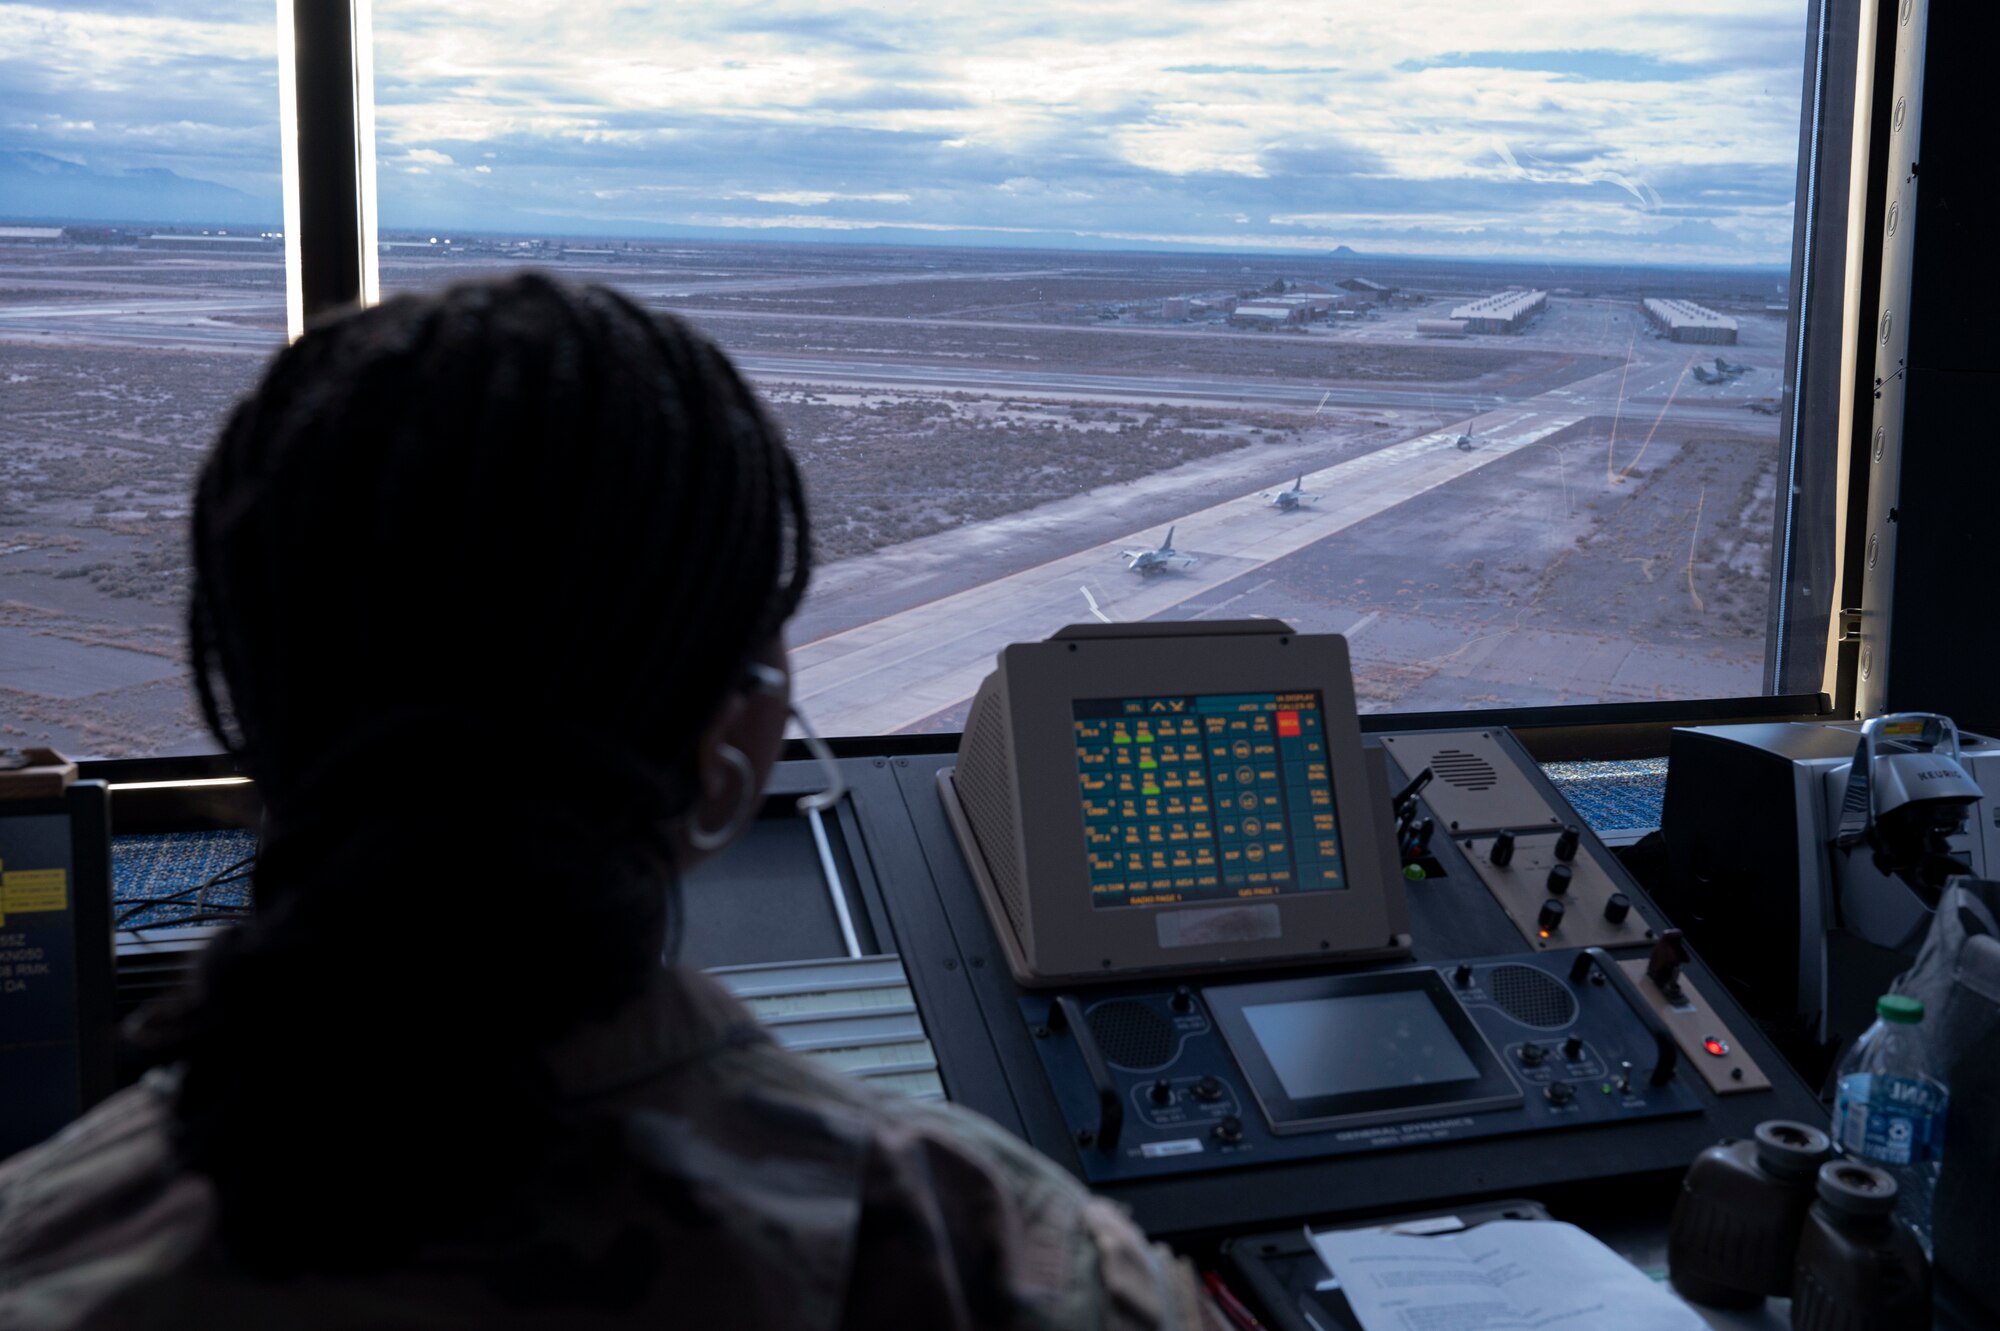 U.S. Air Force Airman 1st Class Indya Wiggins, 54th Operations Support Squadron air traffic controller, monitors the taxiway activity from the air traffic tower, at Holloman Air Force Base, New Mexico, Jan. 24, 2024. Air traffic controllers operate air traffic systems to expedite the flow of all inbound and outbound aircraft on base. (U.S. Air Force photo by Airman 1st Class Michelle Ferrari)